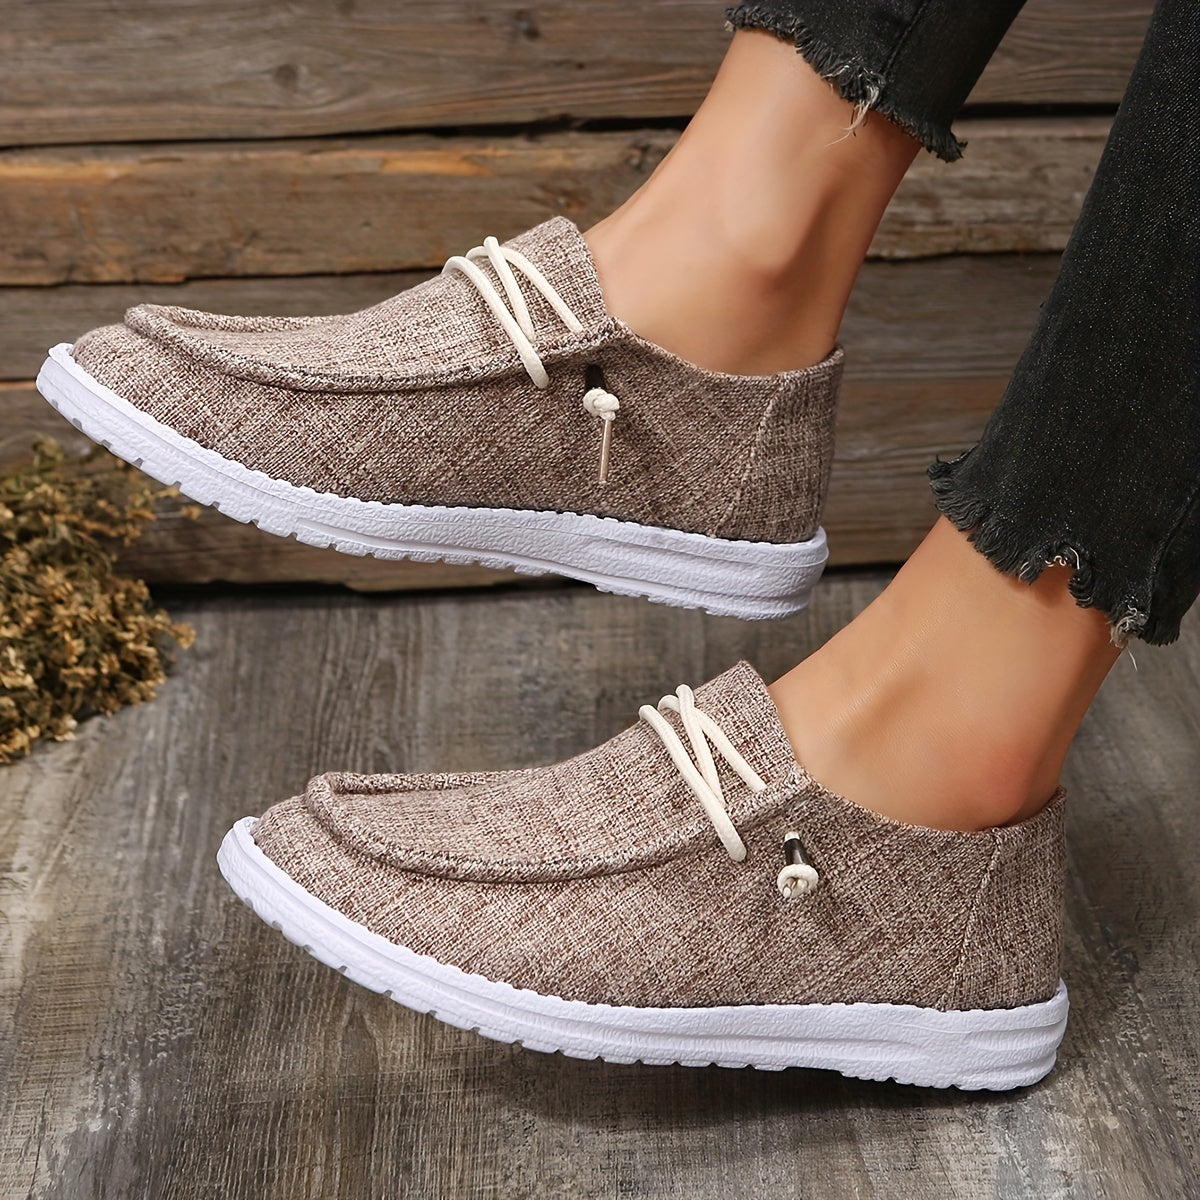 Solid Color Flat Shoes, Slip On Low-top Canvas Shoes